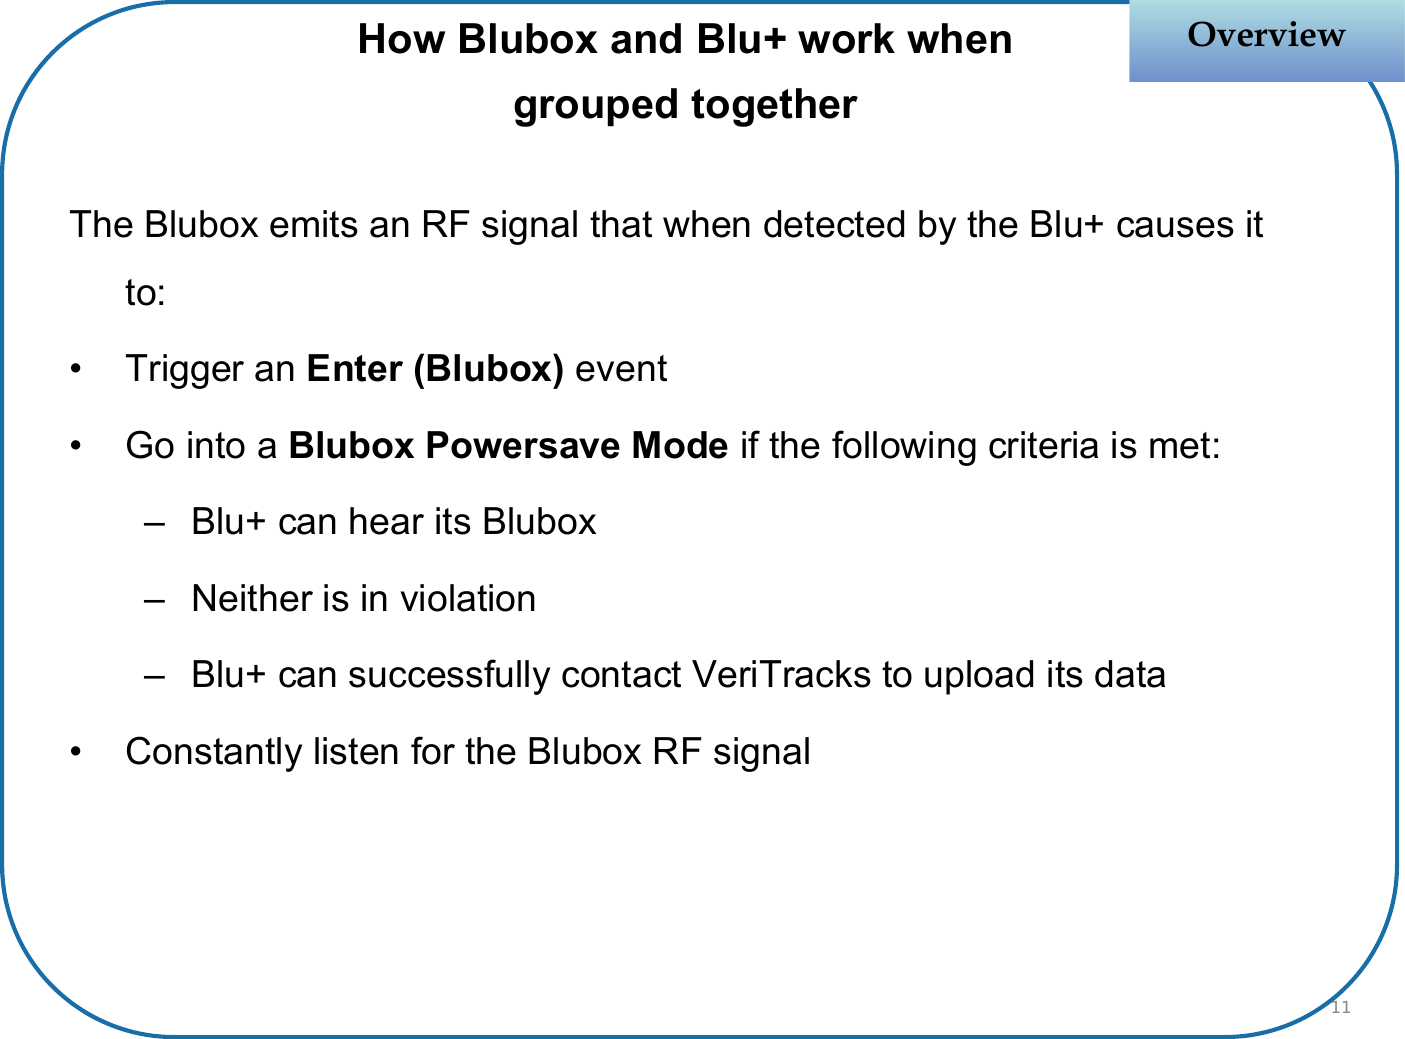 OverviewOverviewThe Blubox emits an RF signal that when detected by the Blu+ causes it to:• Trigger an Enter (Blubox) event• Go into a Blubox Powersave Mode if the following criteria is met:– Blu+ can hear its Blubox– Neither is in violation– Blu+ can successfully contact VeriTracks to upload its data• Constantly listen for the Blubox RF signalHow Blubox and Blu+ work when grouped together11